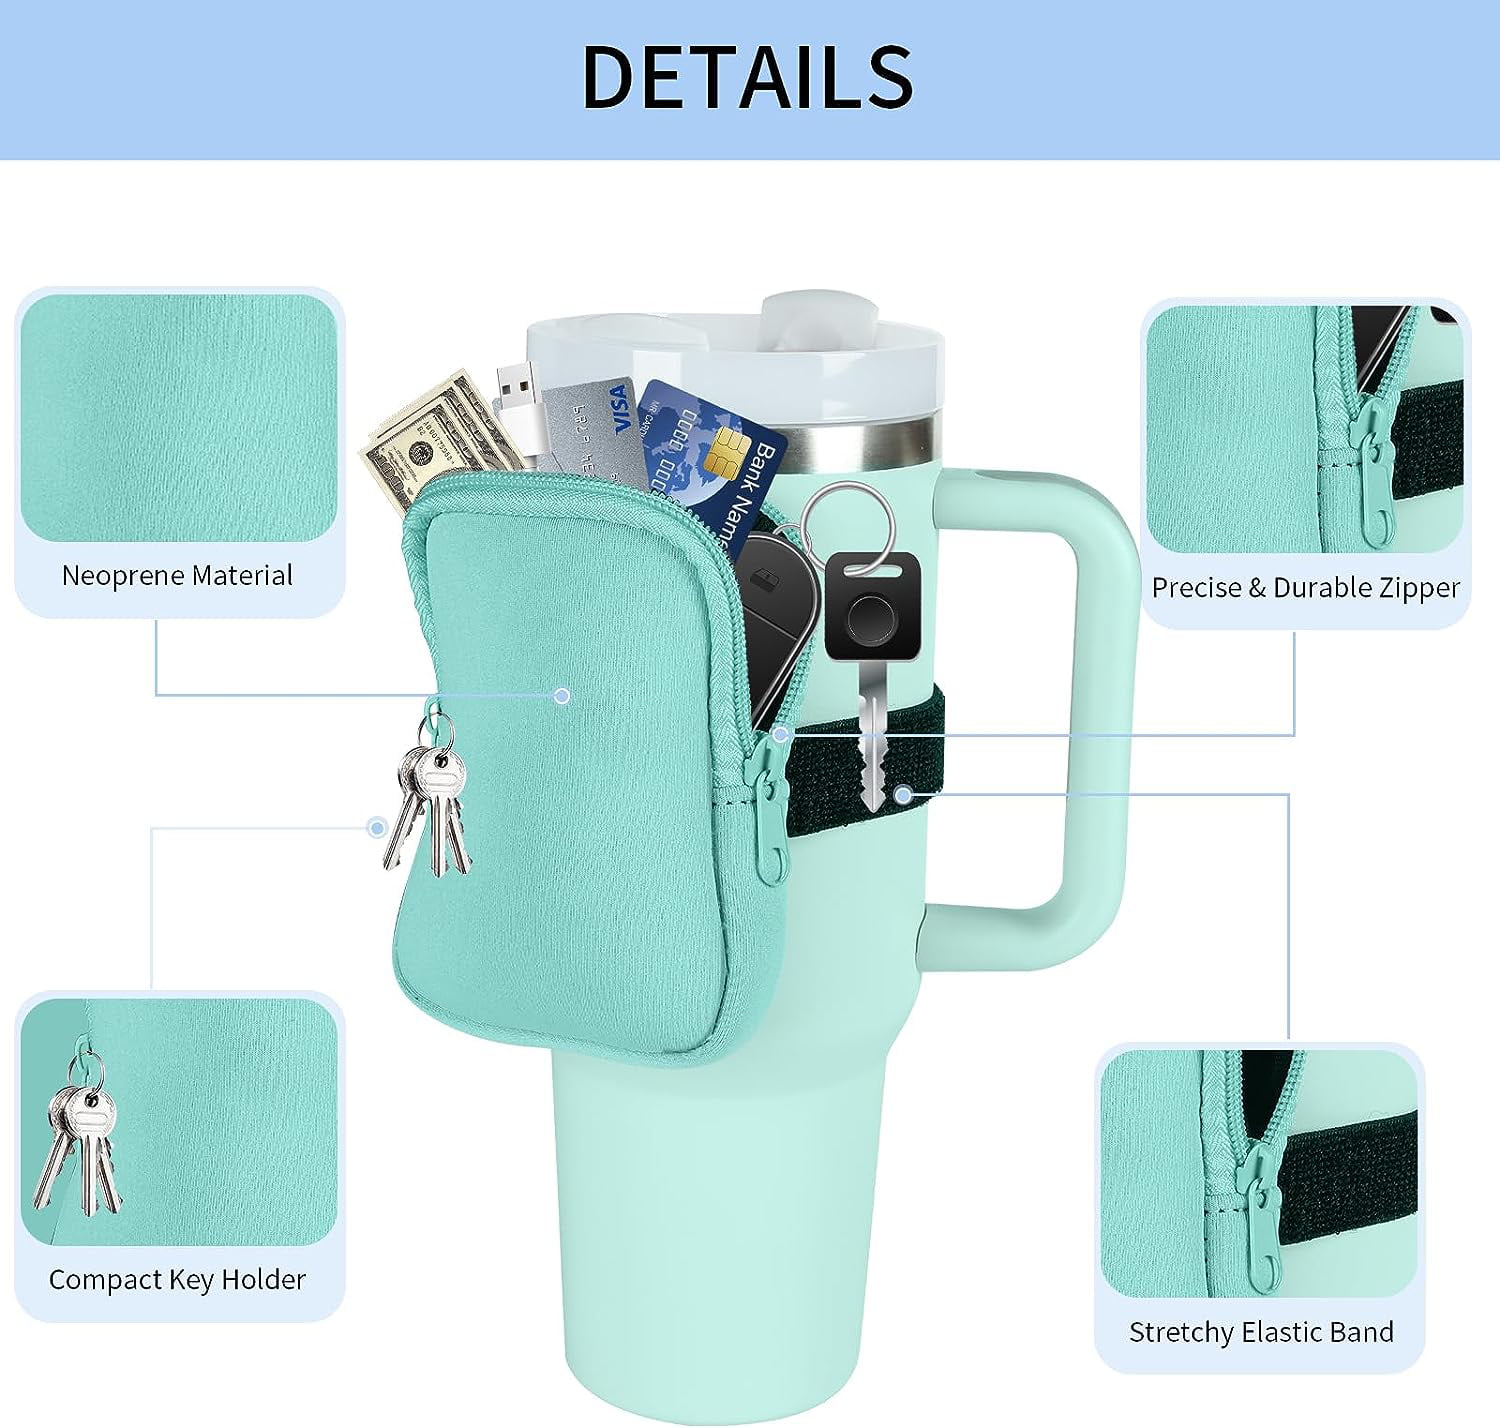 Bottle Pouch Gym Water Caddy with Phone Holder, Water Bottle Sleeve Bag  with Pocket for Cards, Keys,…See more Bottle Pouch Gym Water Caddy with  Phone